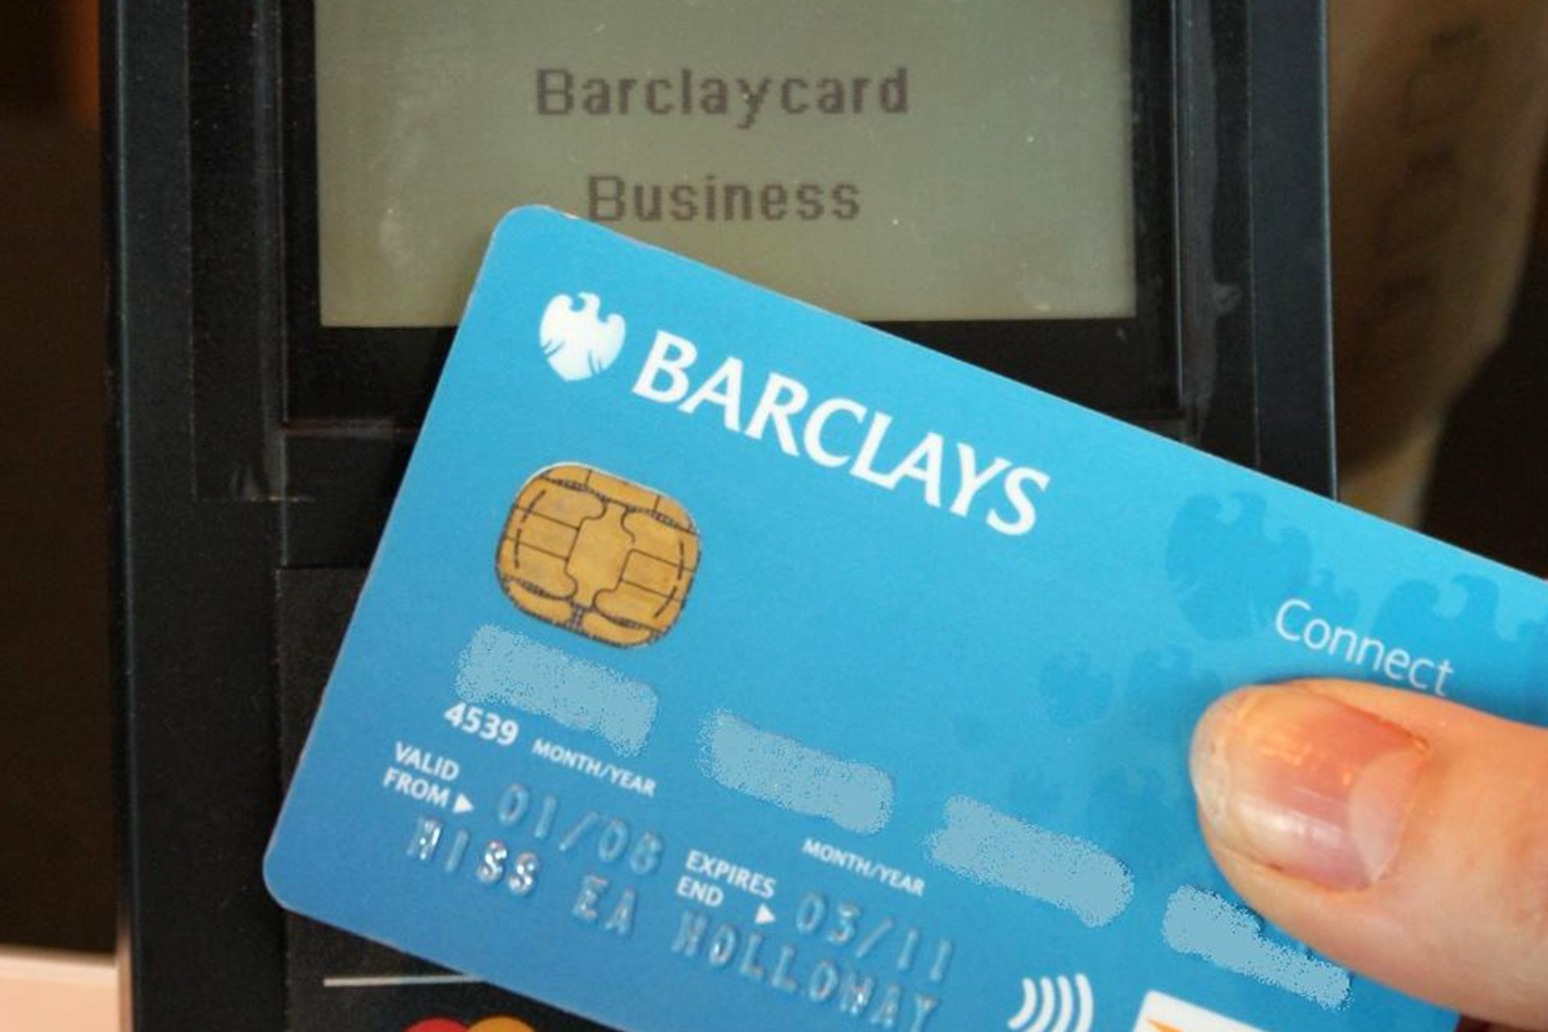 80 of 85 to 95 year olds now pay contactless